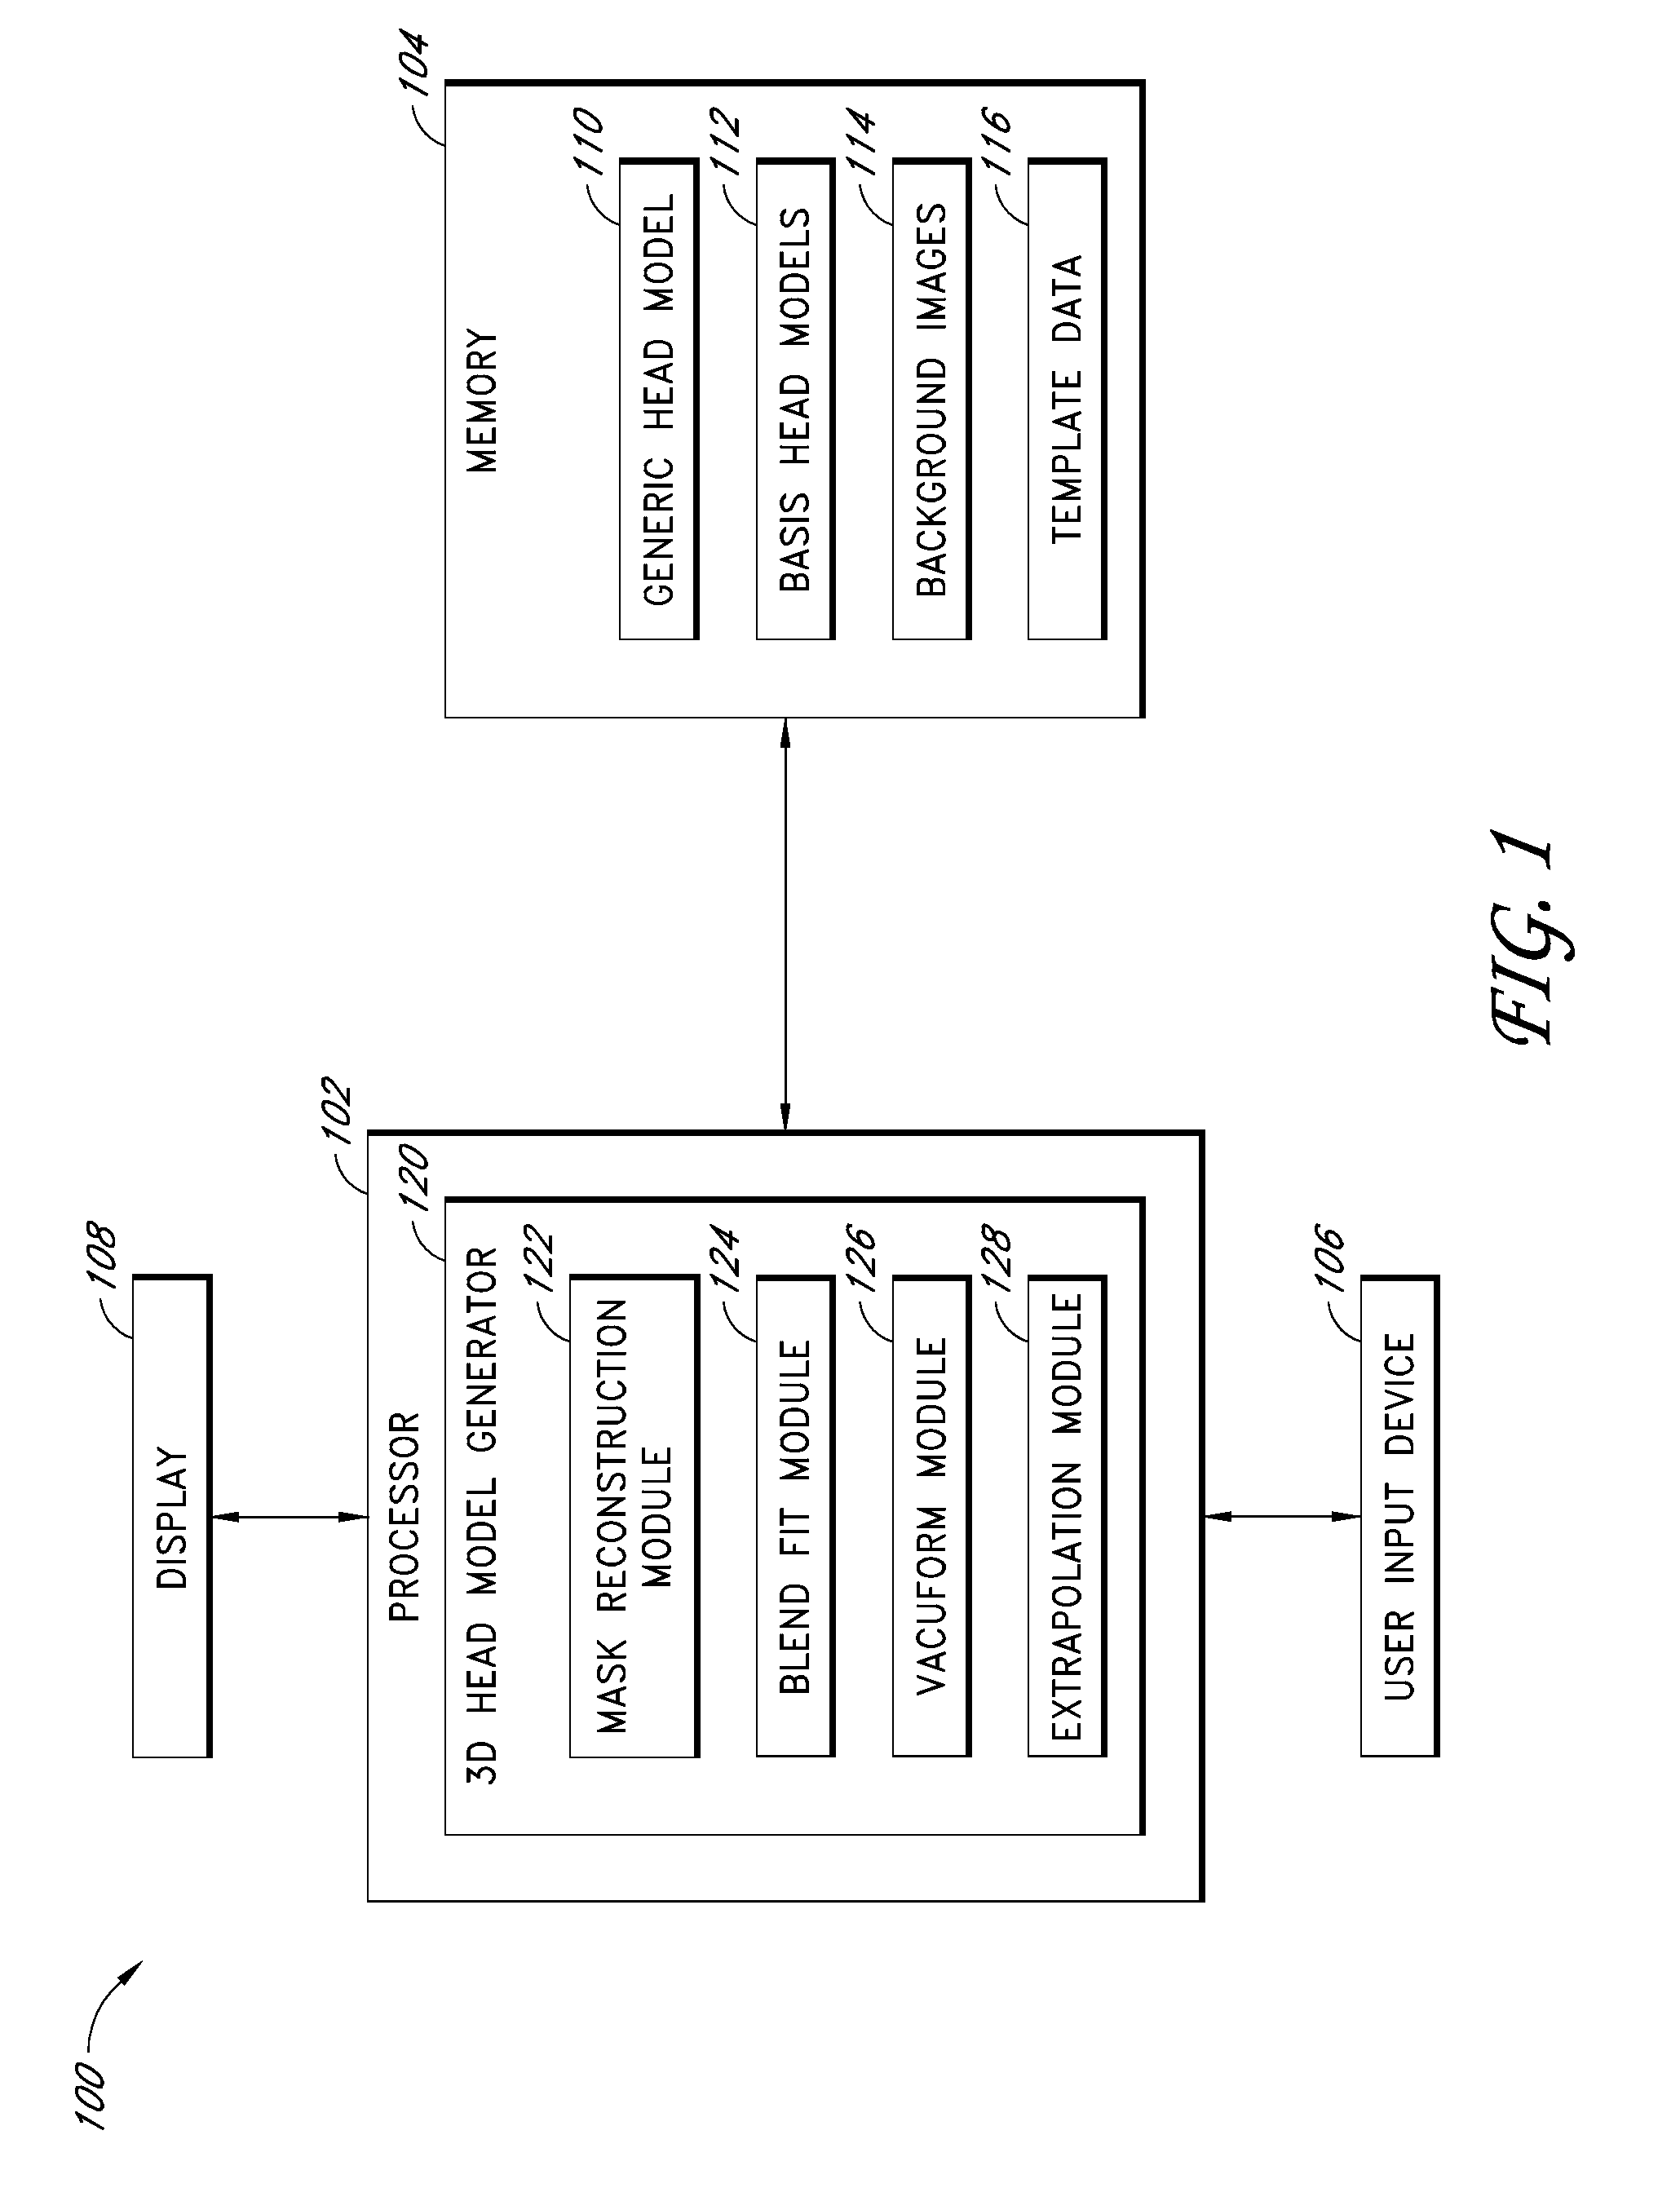 Systems and methods for creating personalized media content having multiple content layers